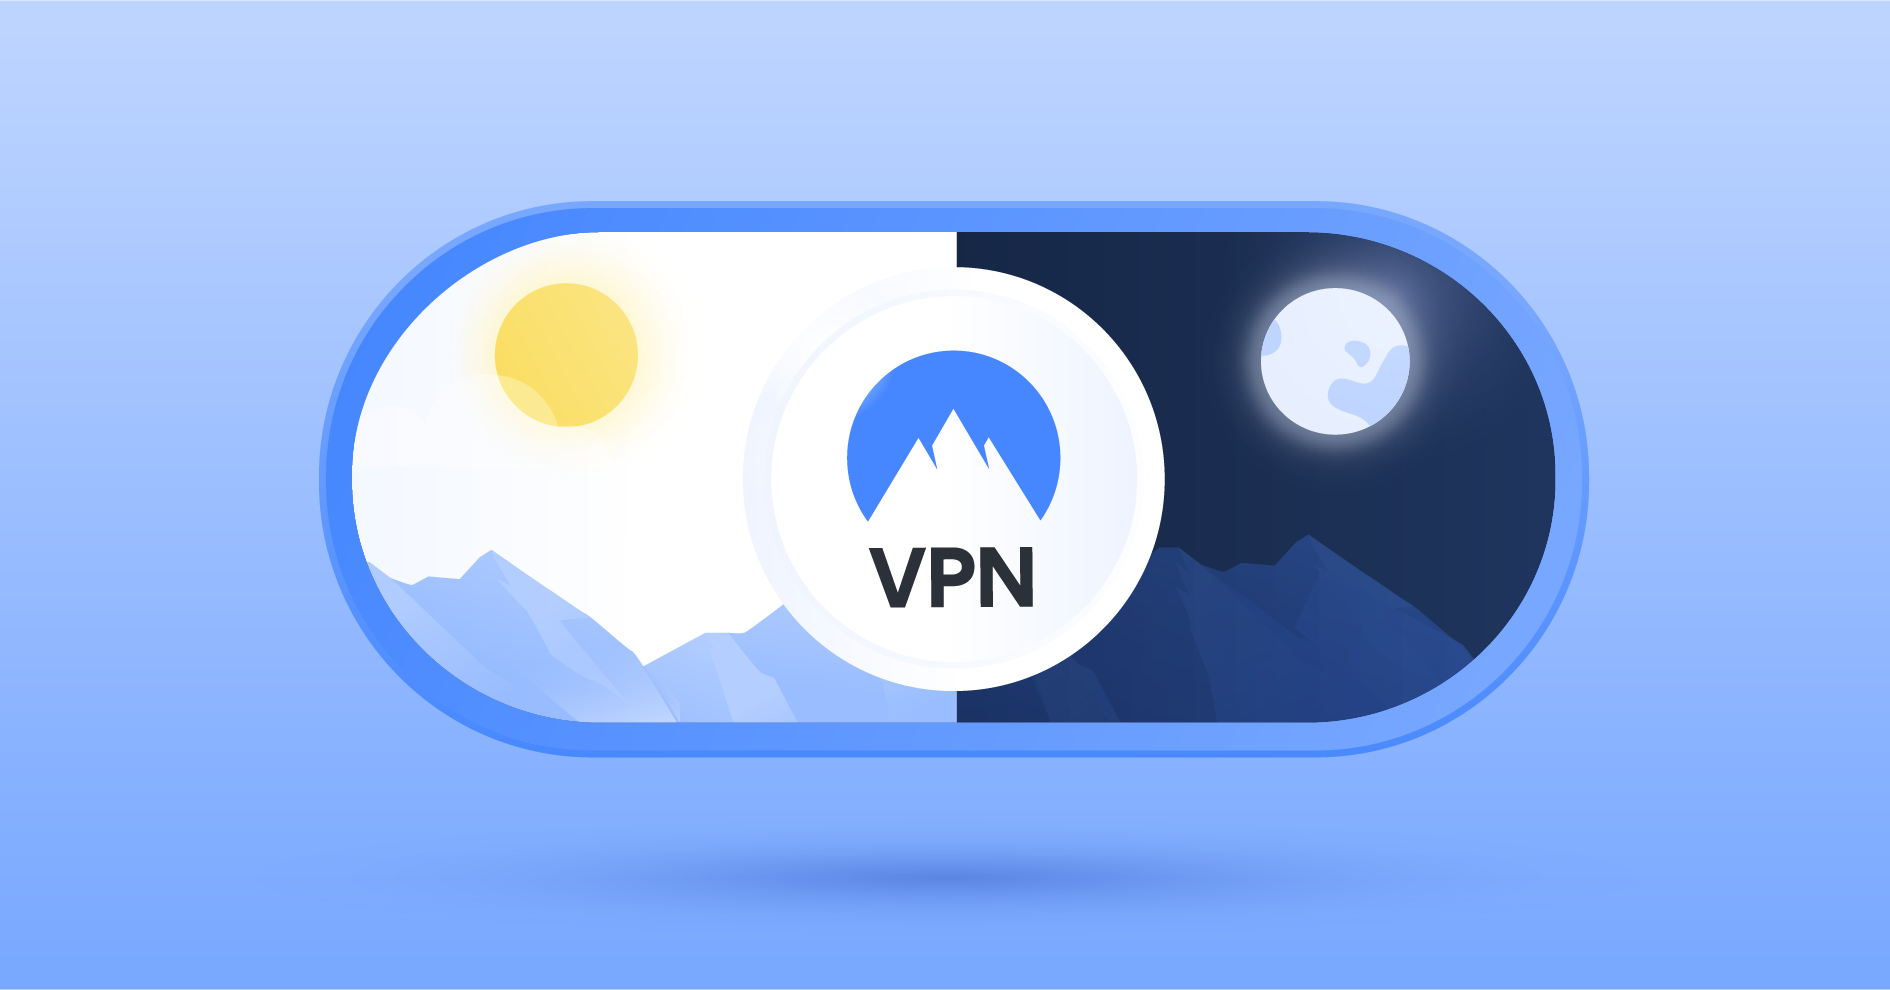 Which VPN is the safest?